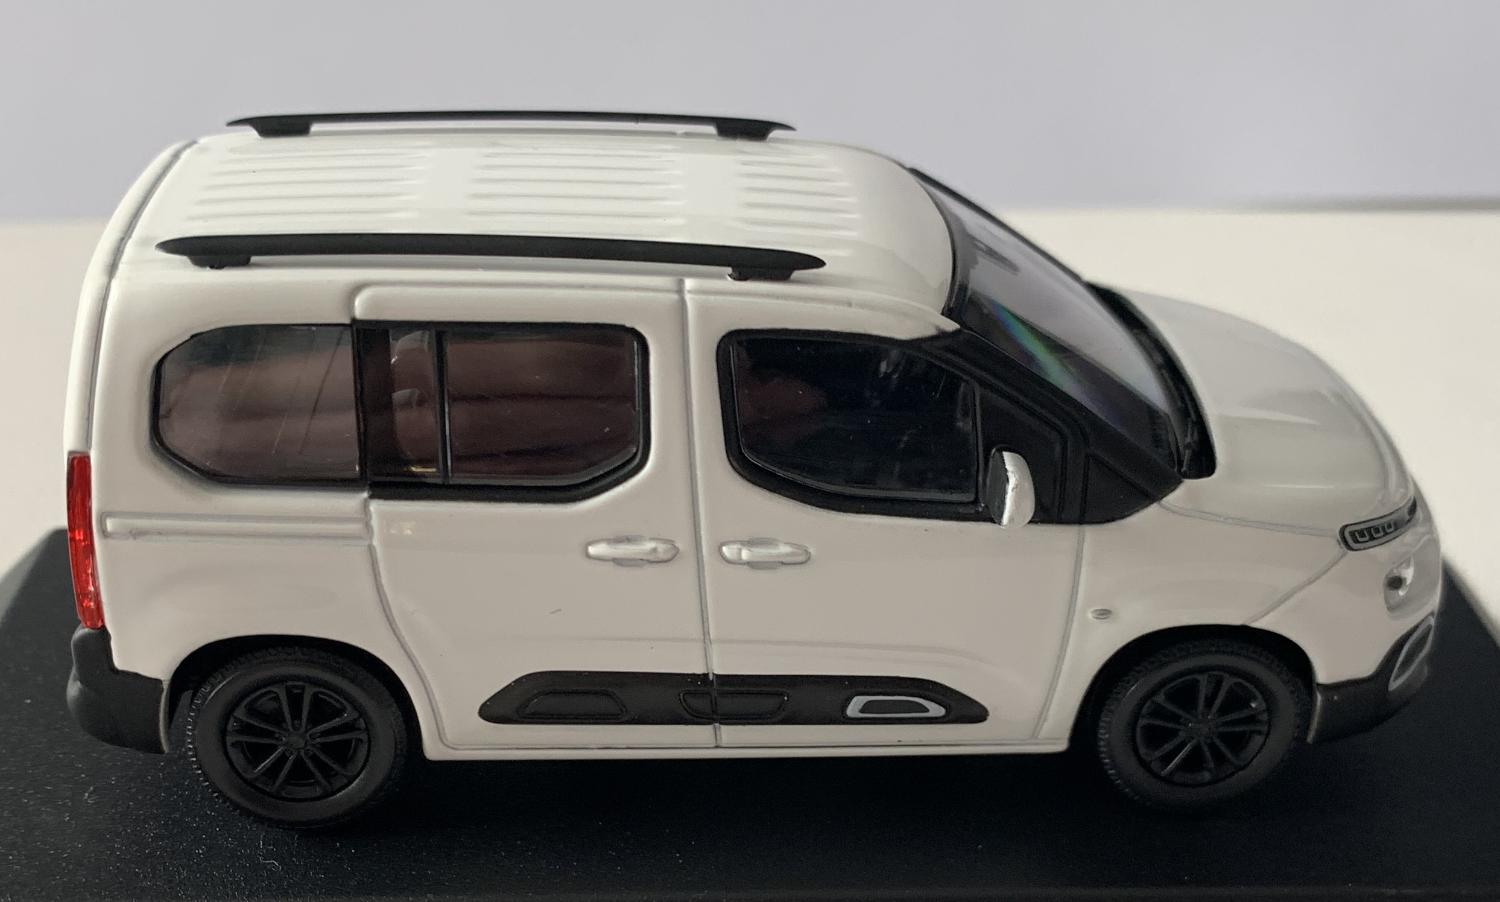 An excellent scale model of a Citroen Berlingo decorated in white with black roof rails, tinted windows and black wheels.  Other trims are finished in black, chrome and white.